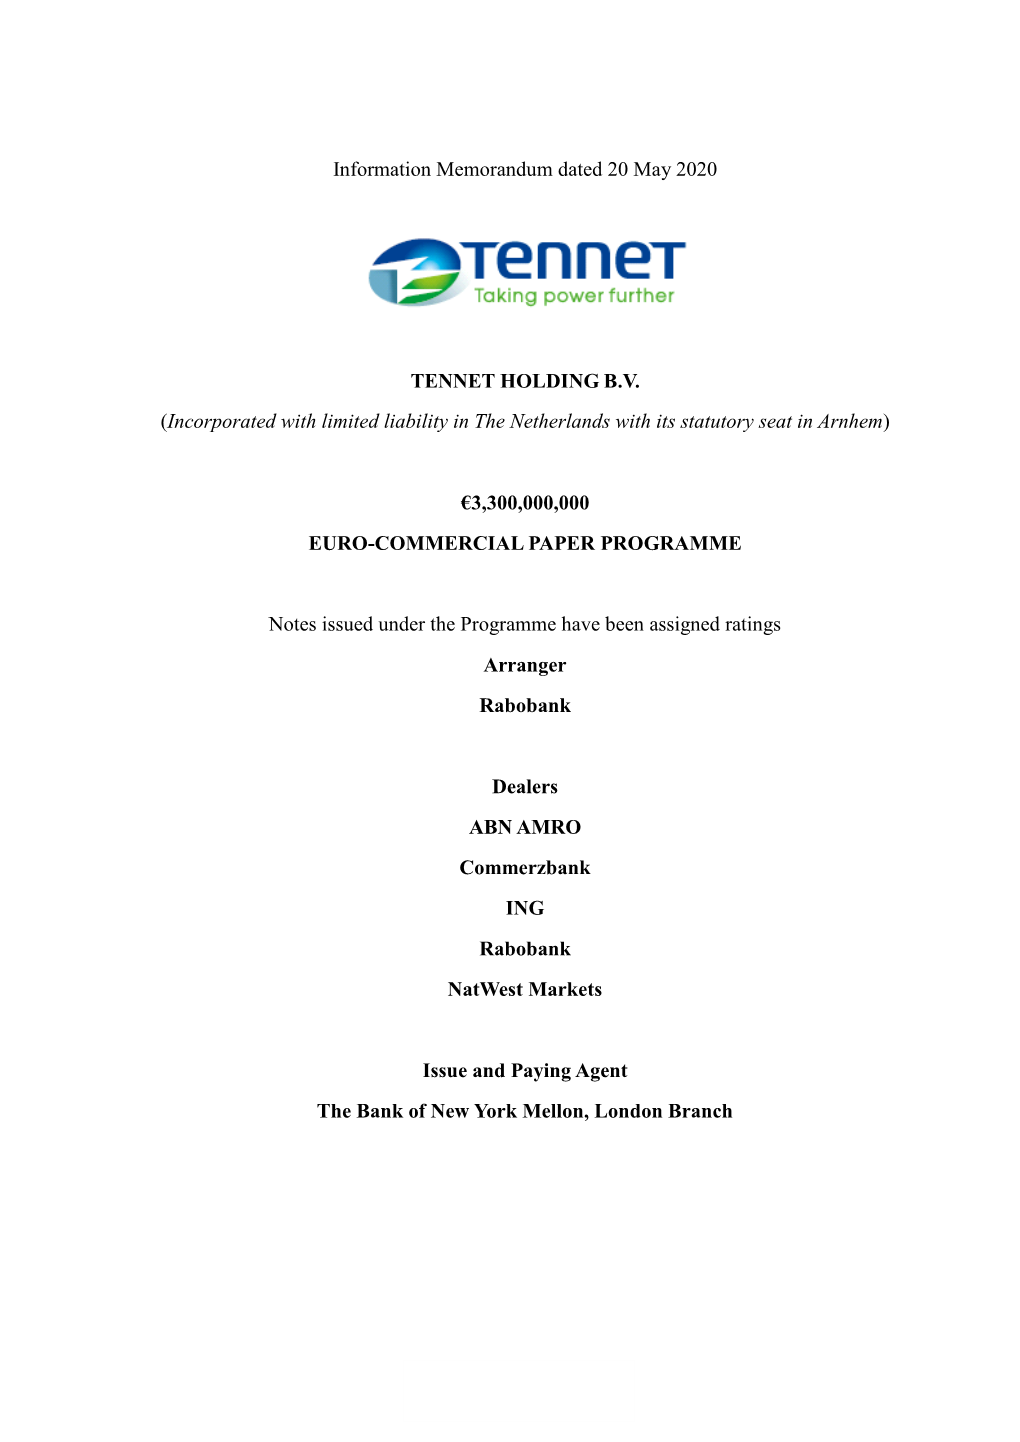 Information Memorandum Dated 20 May 2020 TENNET HOLDING B.V. (Incorporated with Limited Liability in the Netherlands with Its St